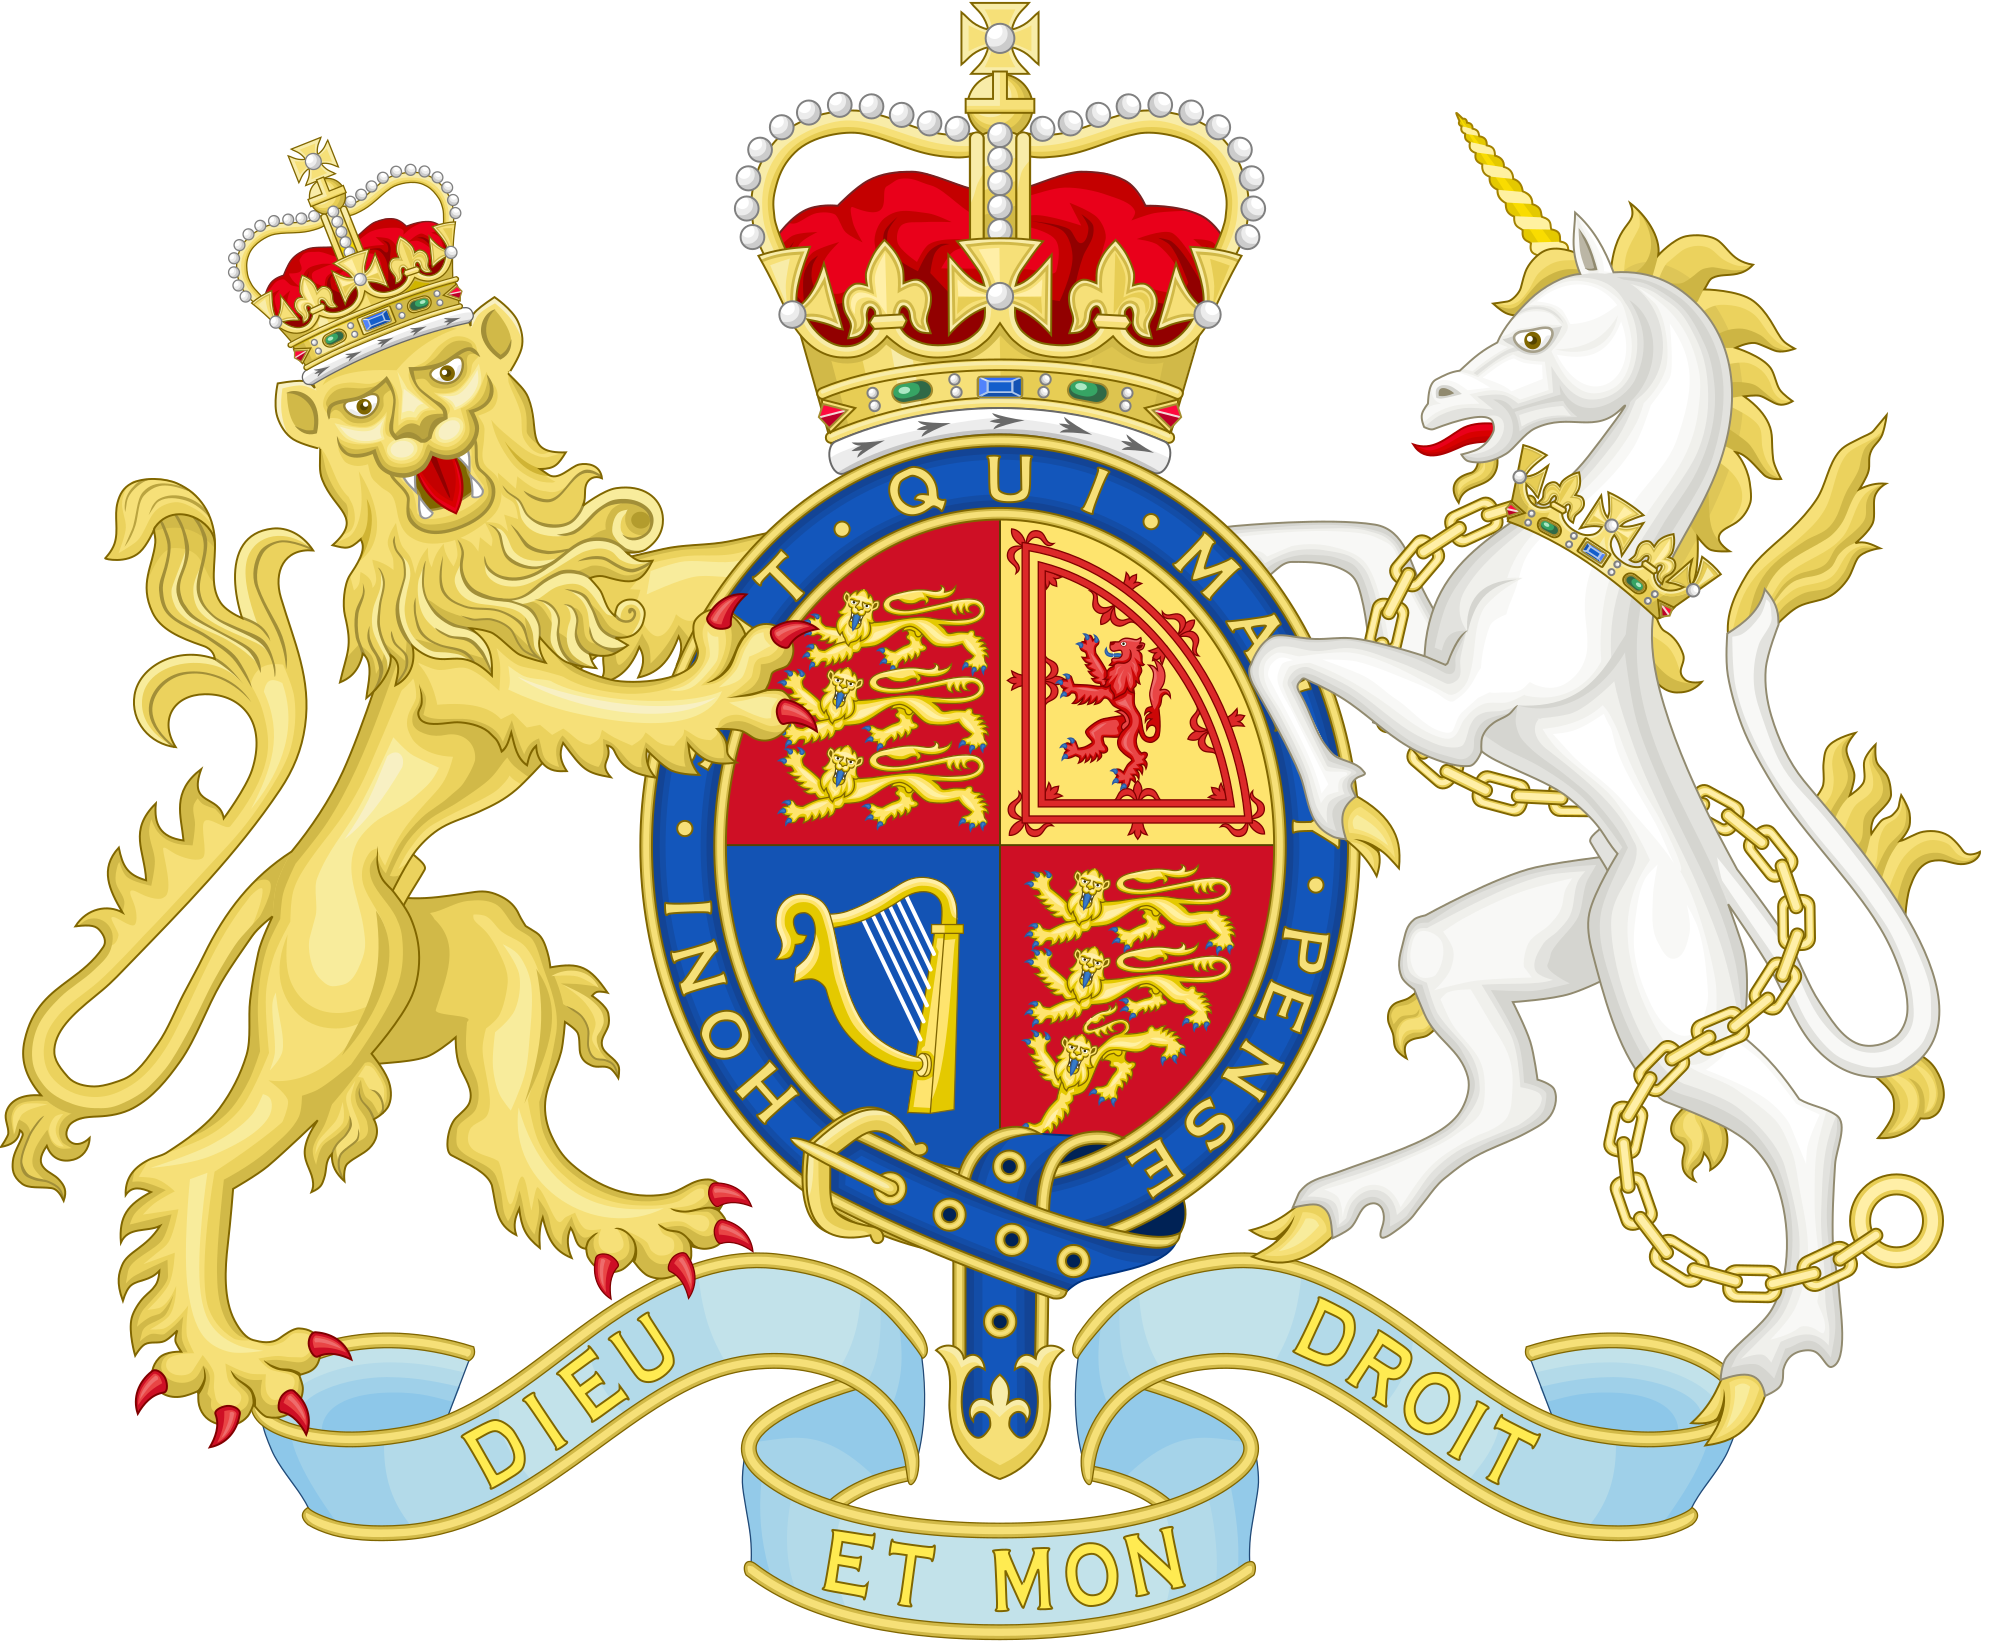 Court clipart establish justice. High of wikipedia royal